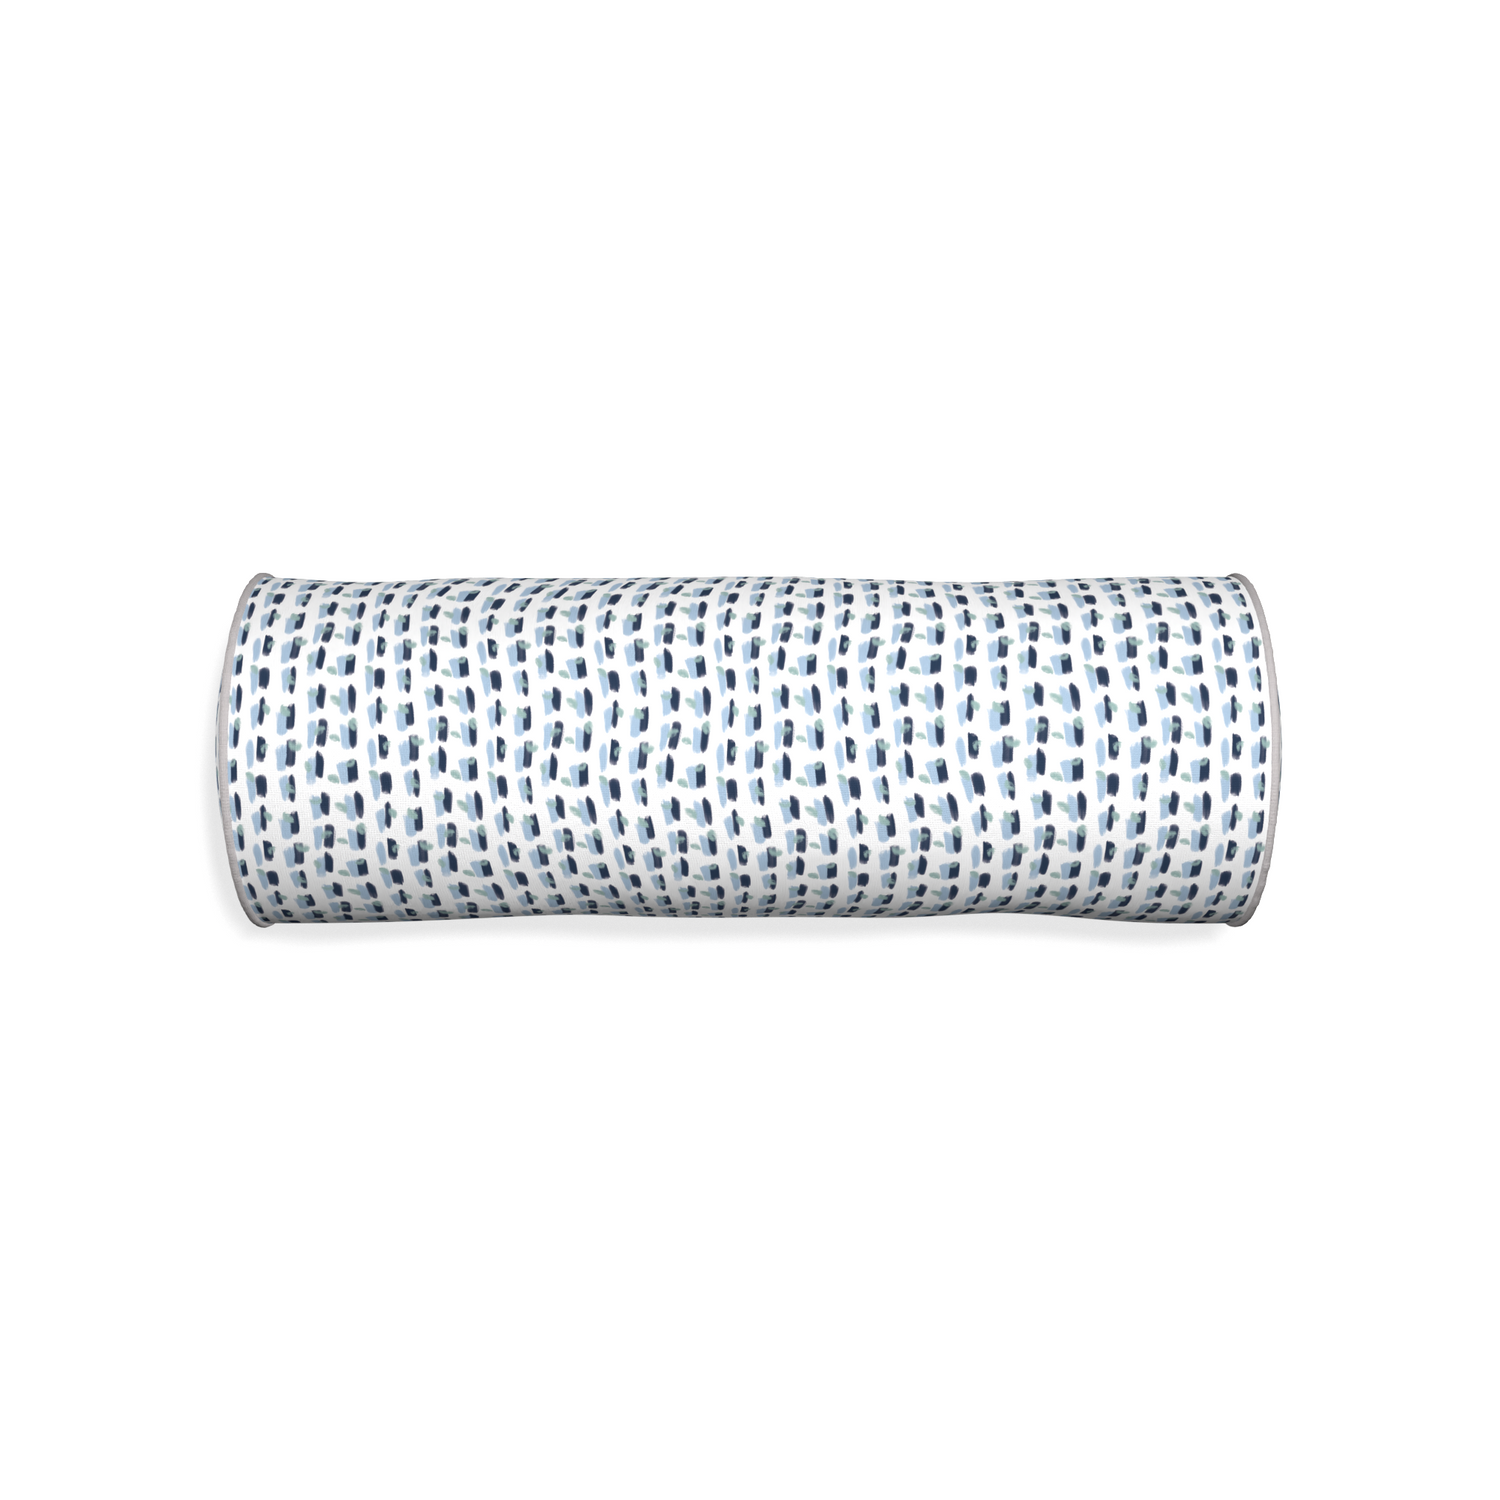 Bolster poppy custom blue and whitepillow with pebble piping on white background